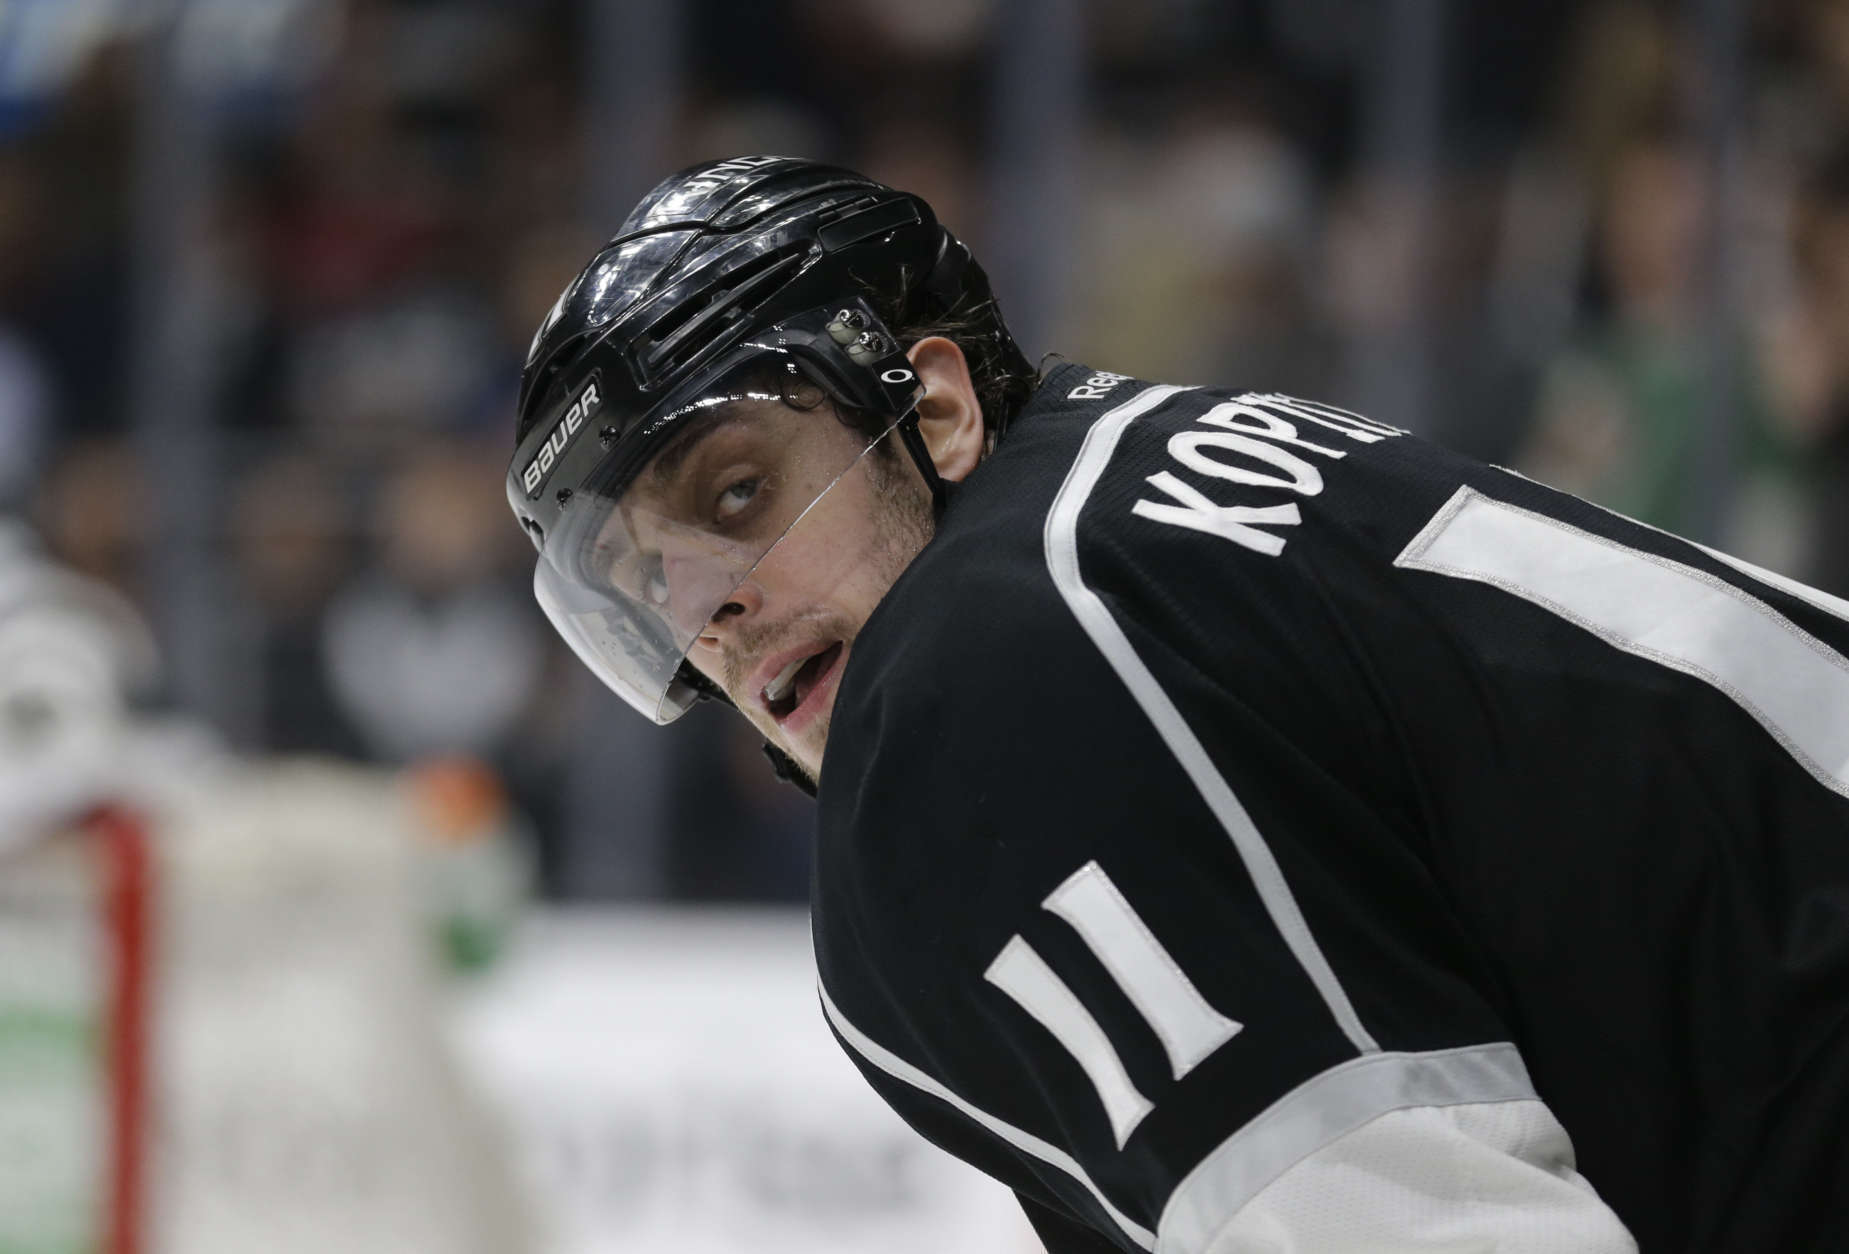 Los Angeles Kings' Anze Kopitar, of Slovenia, looks on during the third period of an NHL hockey game against the Montreal Canadiens Thursday, March 3, 2016, in Los Angeles. The Kings won 3-2. (AP Photo/Jae C. Hong)